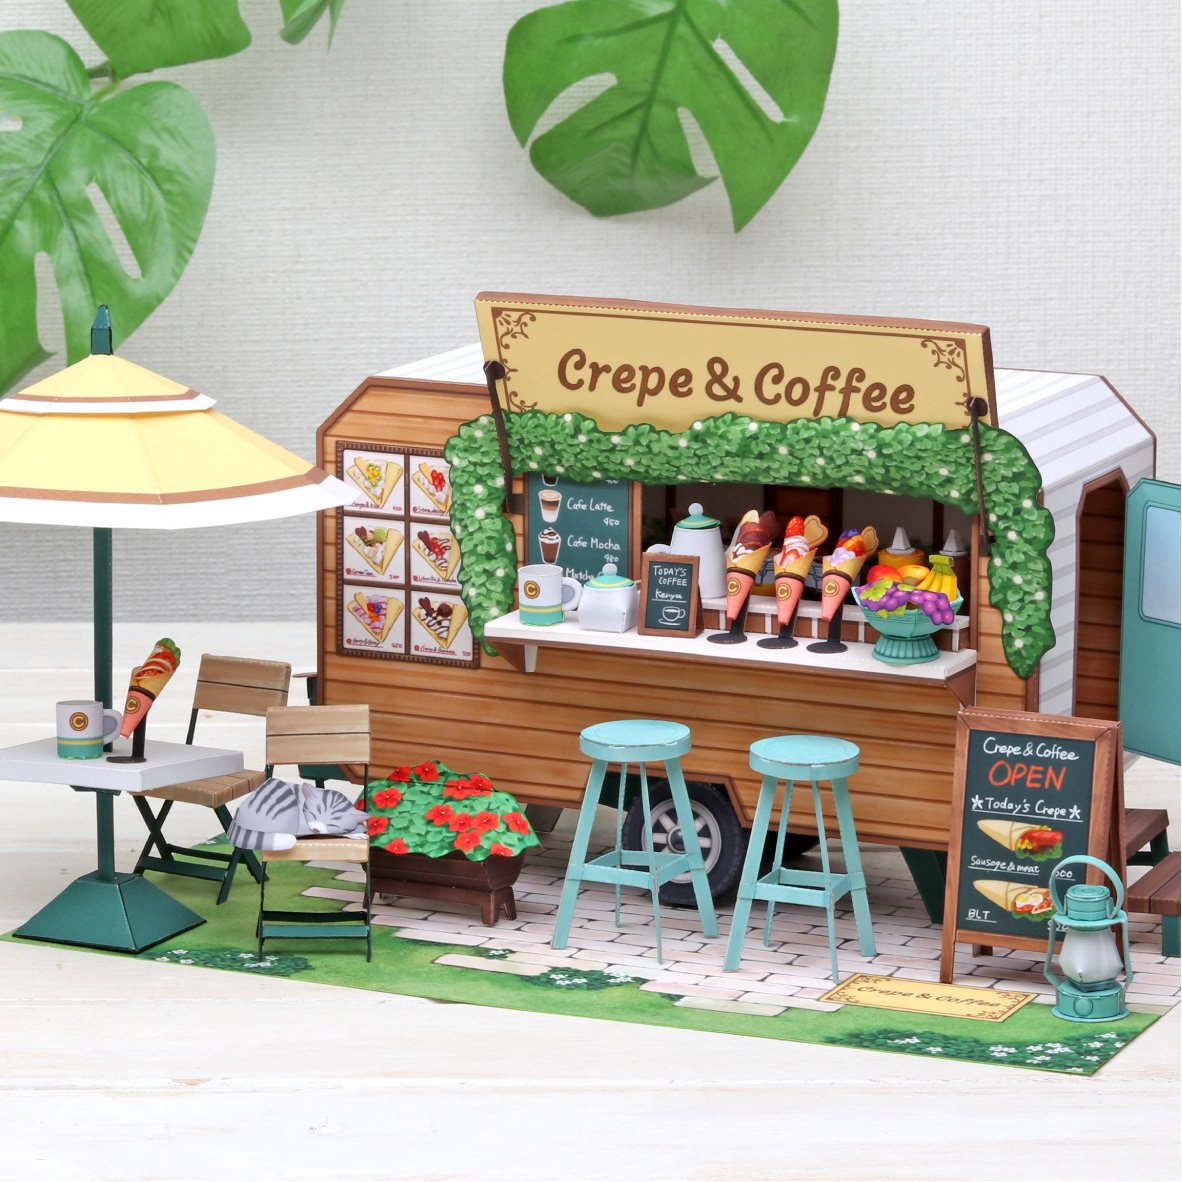 Crepes & Coffee Printable Paper Toy, Assemble and Play, Fun Paper Toy for Kids, Instant Download PDF